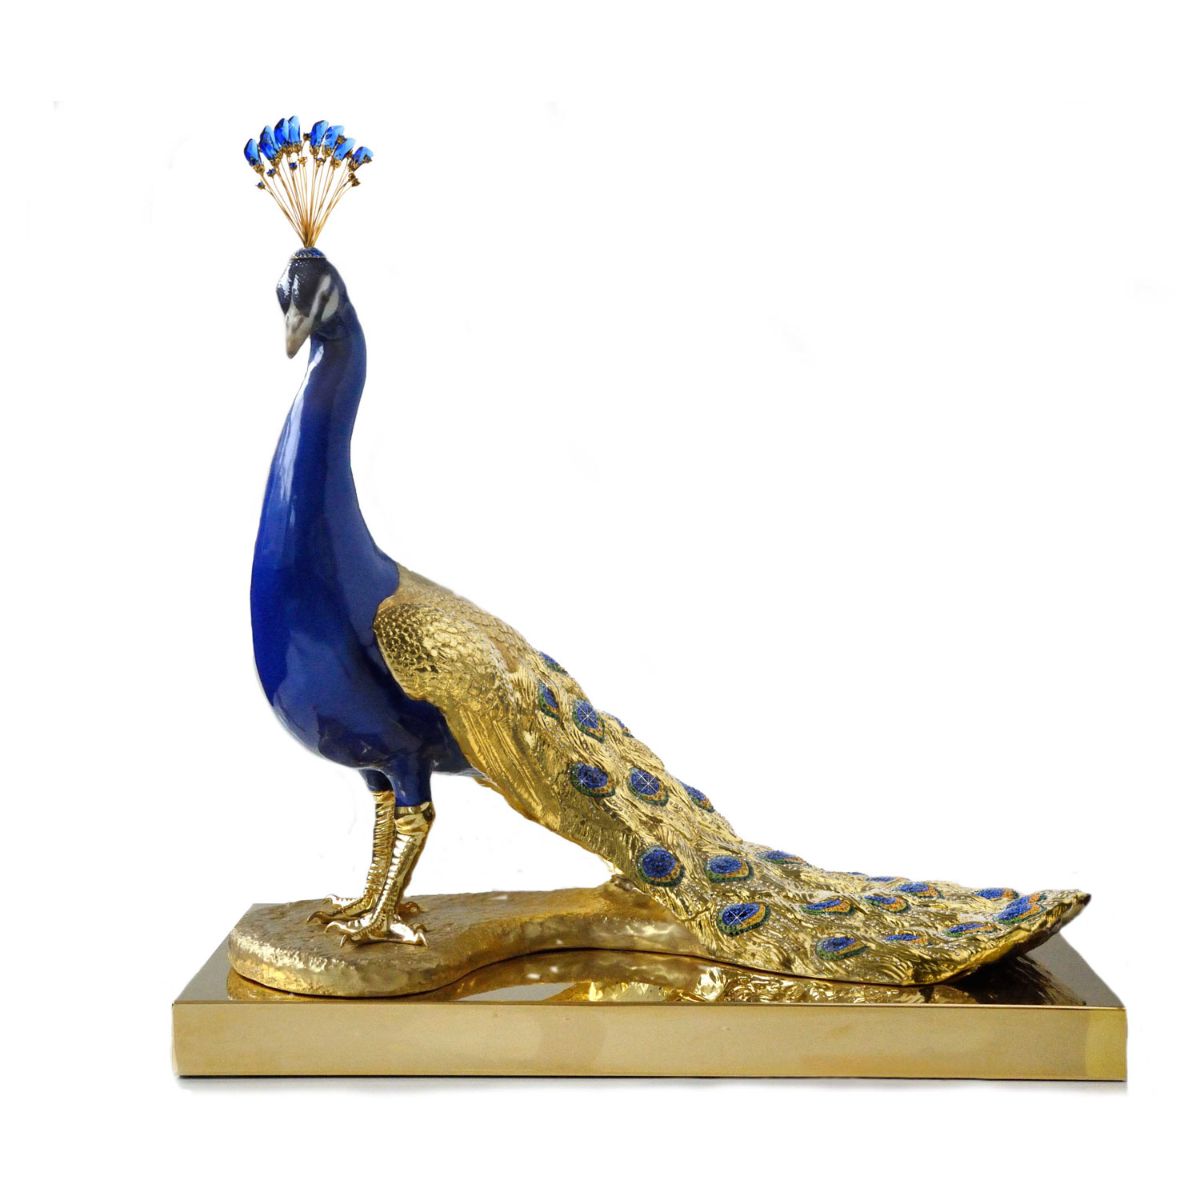 Royal Peacock with Swarovski® - Limited Edition 88 Pcs - Sapphire